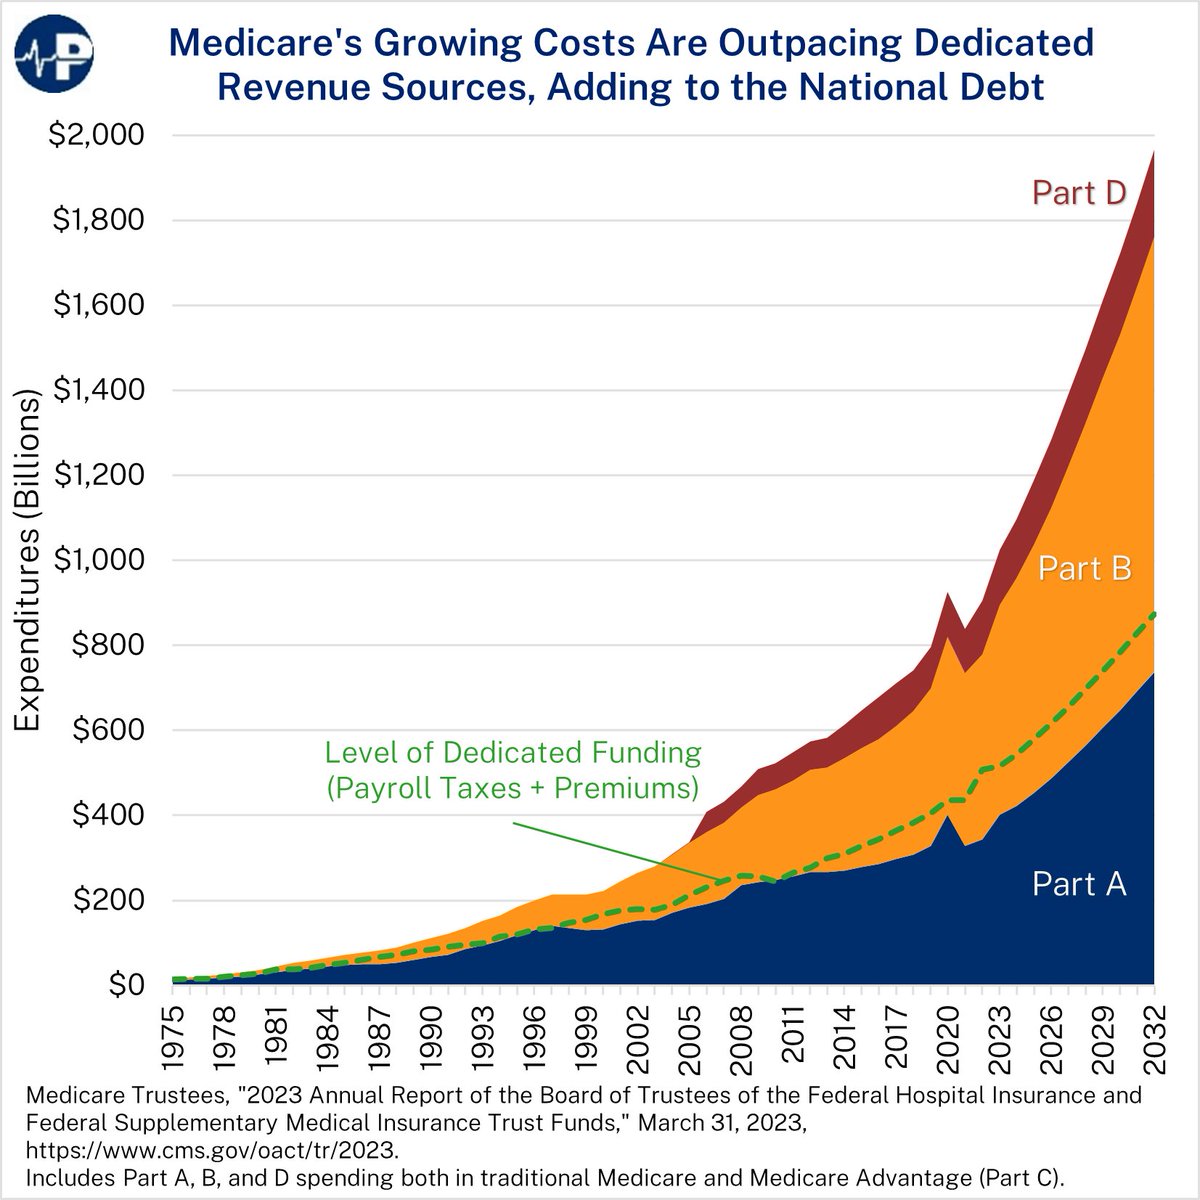 📈#Medicare's spending is outpacing its dedicated funding sources, and costs for every component are rising rapidly. #PartB spending soared by 82% from 2013 to 2022--predominantly driven by outpatient hospital services and drugs, which saw increases of 90% and 113%. #ParagonPIC